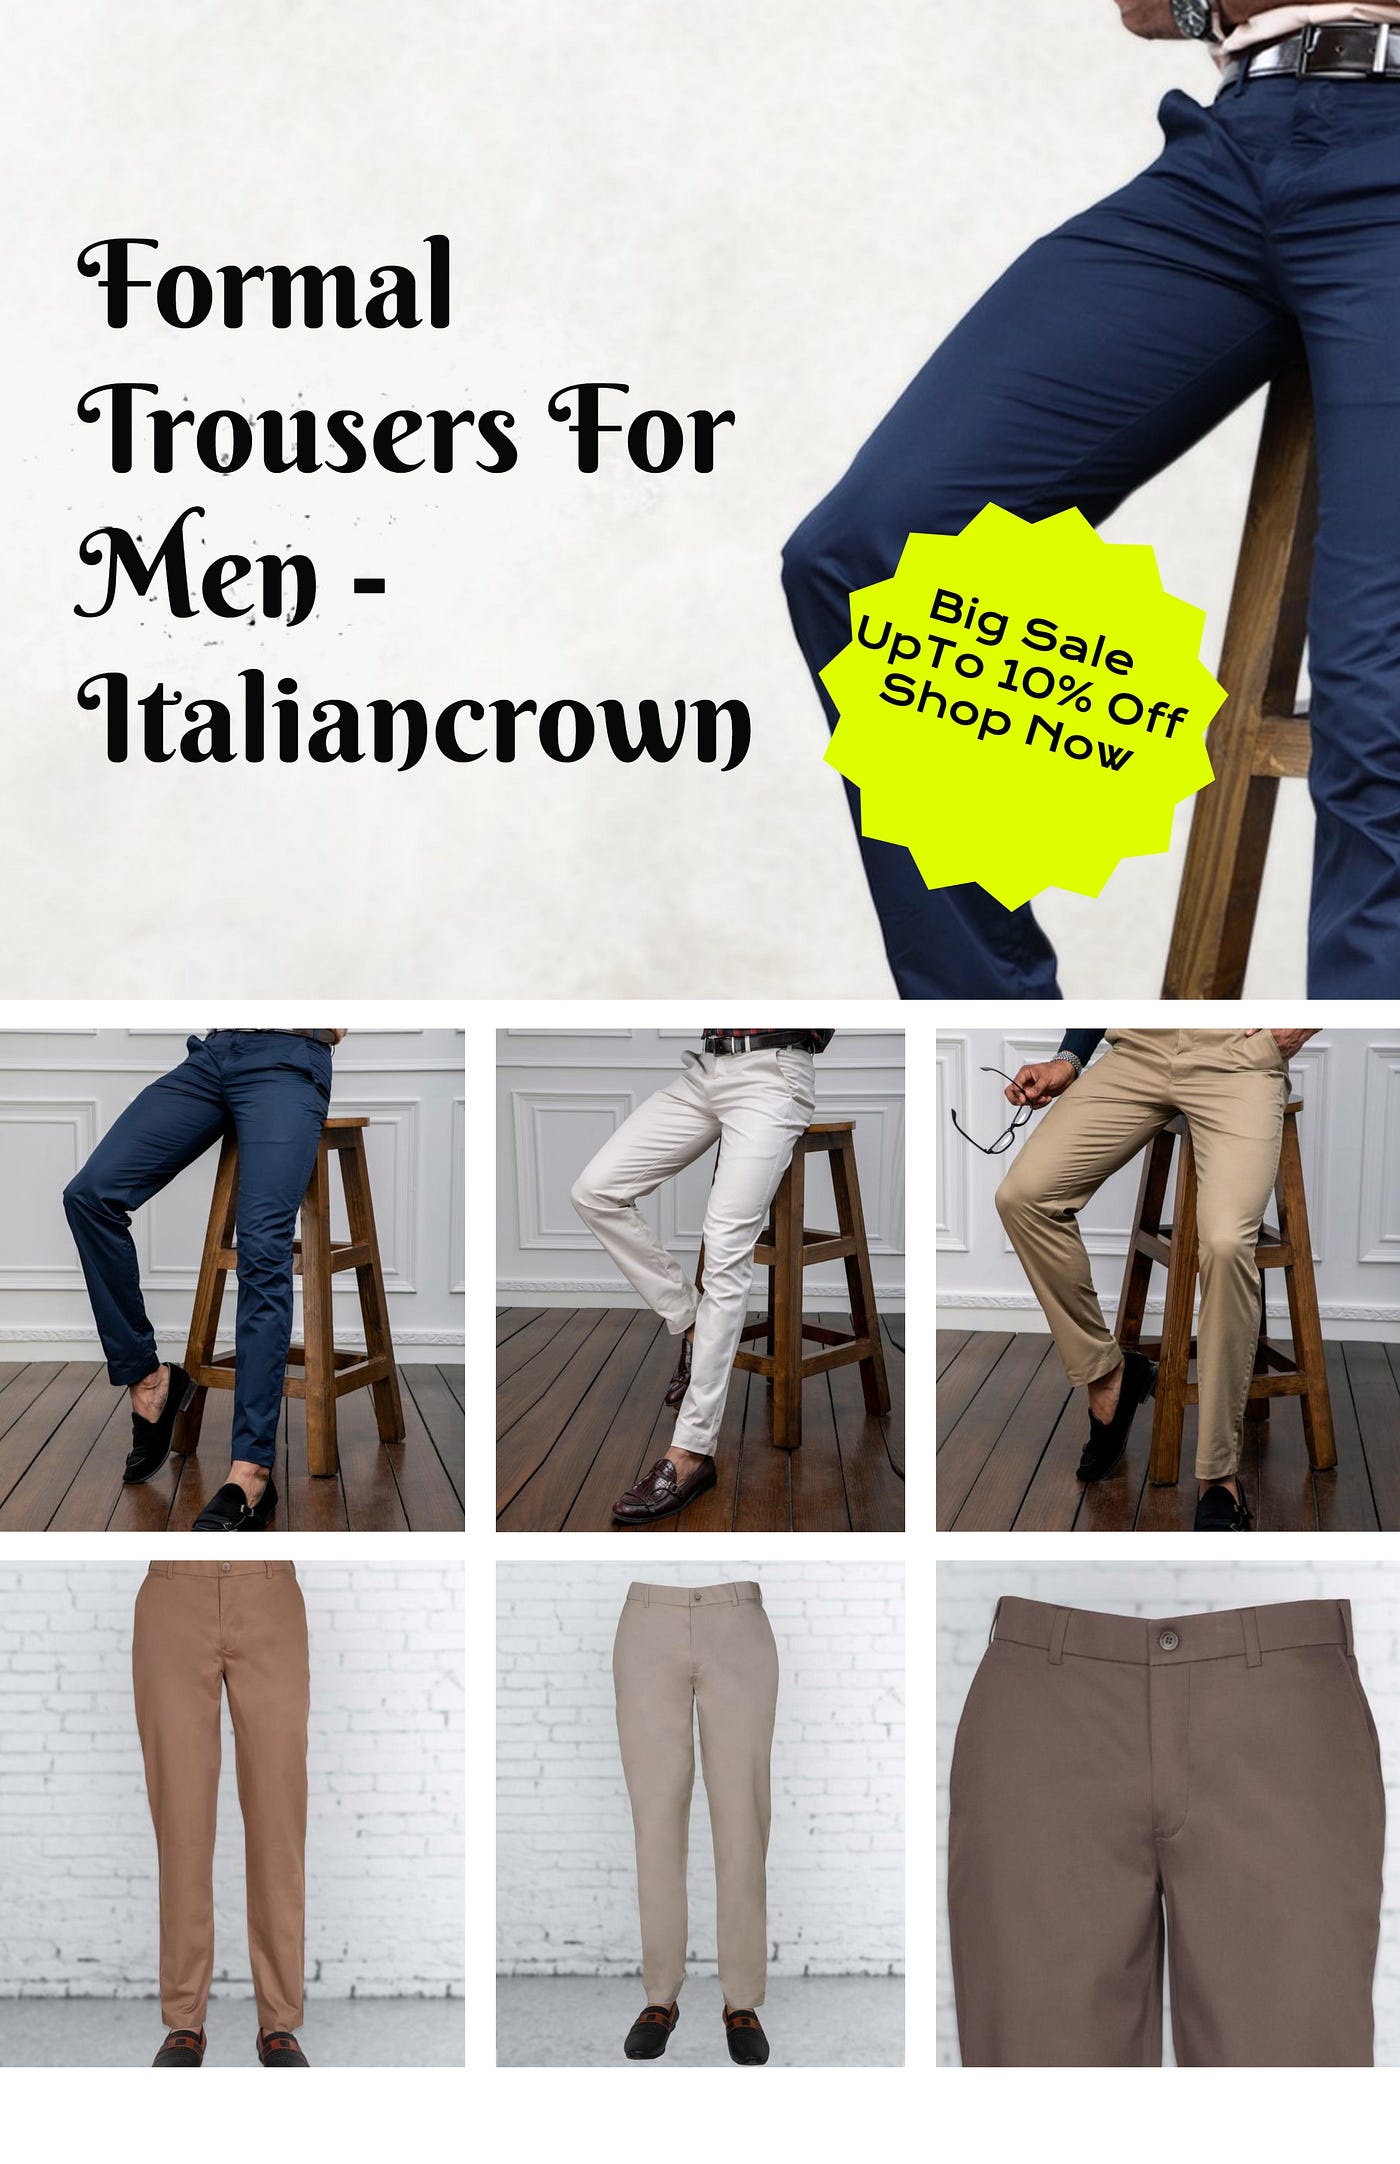 6 Types Of Formal Pants Well Suited For All Events! — Italiancrown, by  trousercollection